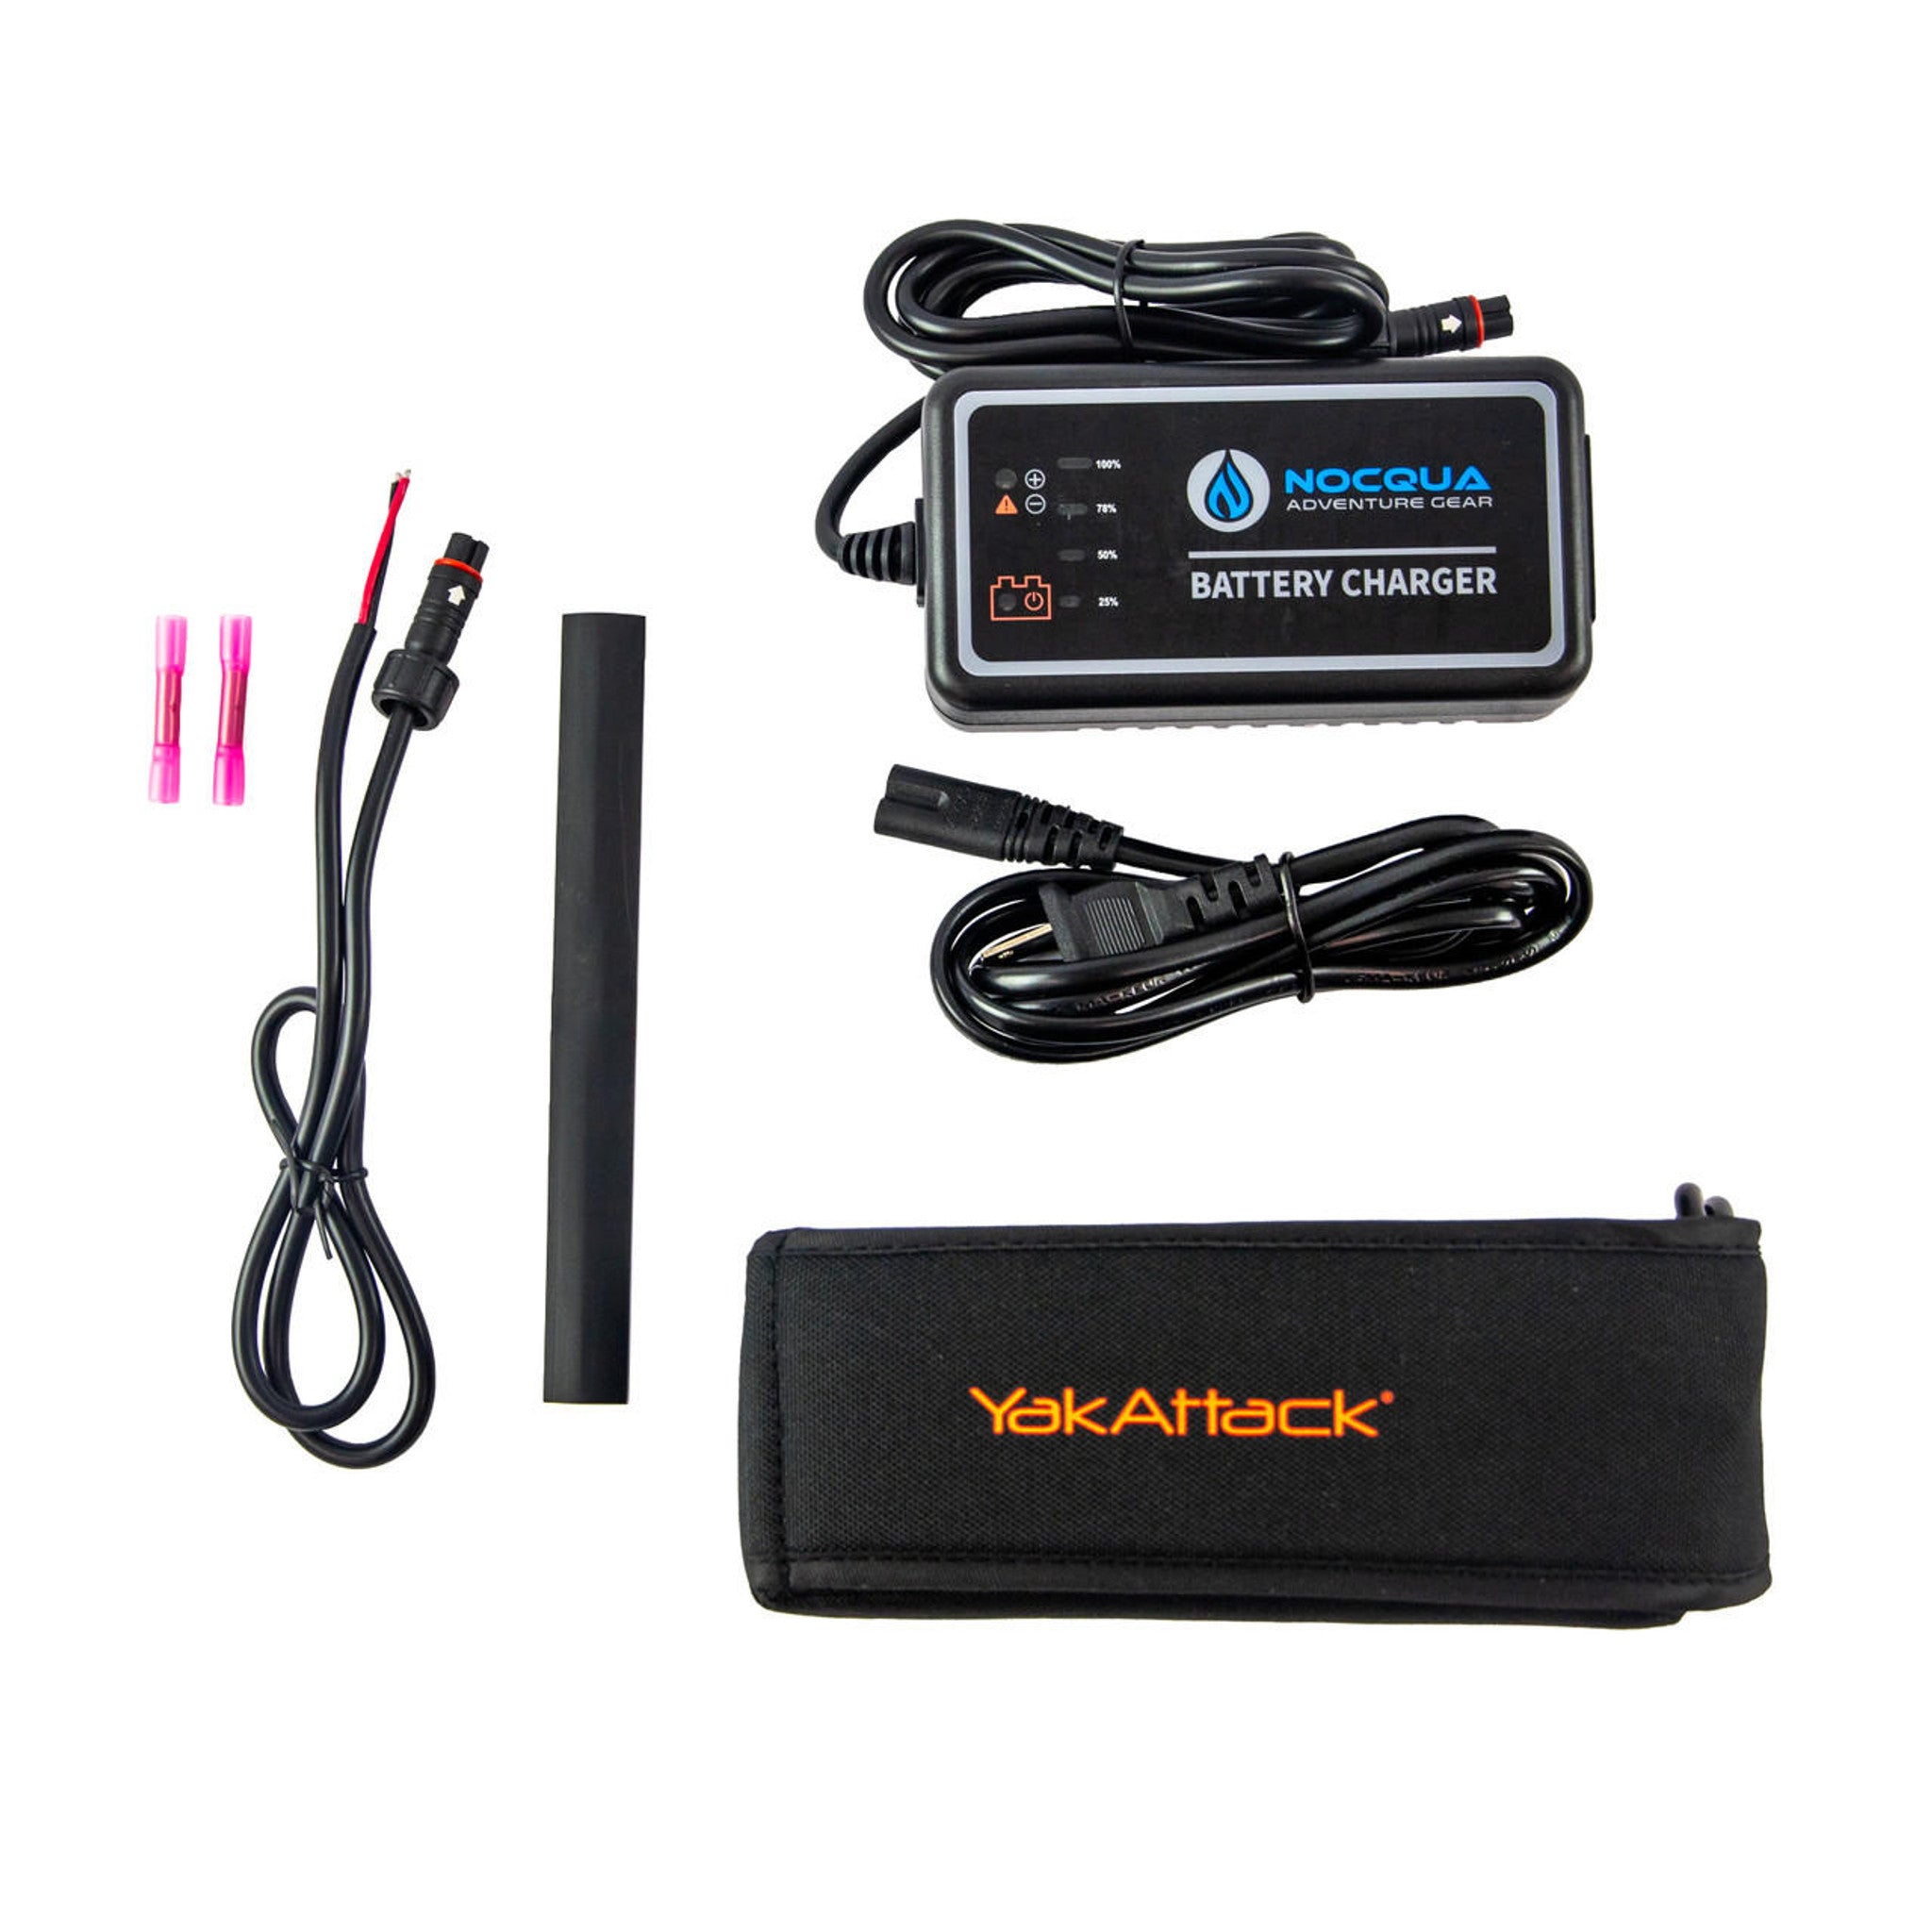 YakAttack 20Ah Battery Power Kit, Lithium-ion water-resistant battery pack w/charger